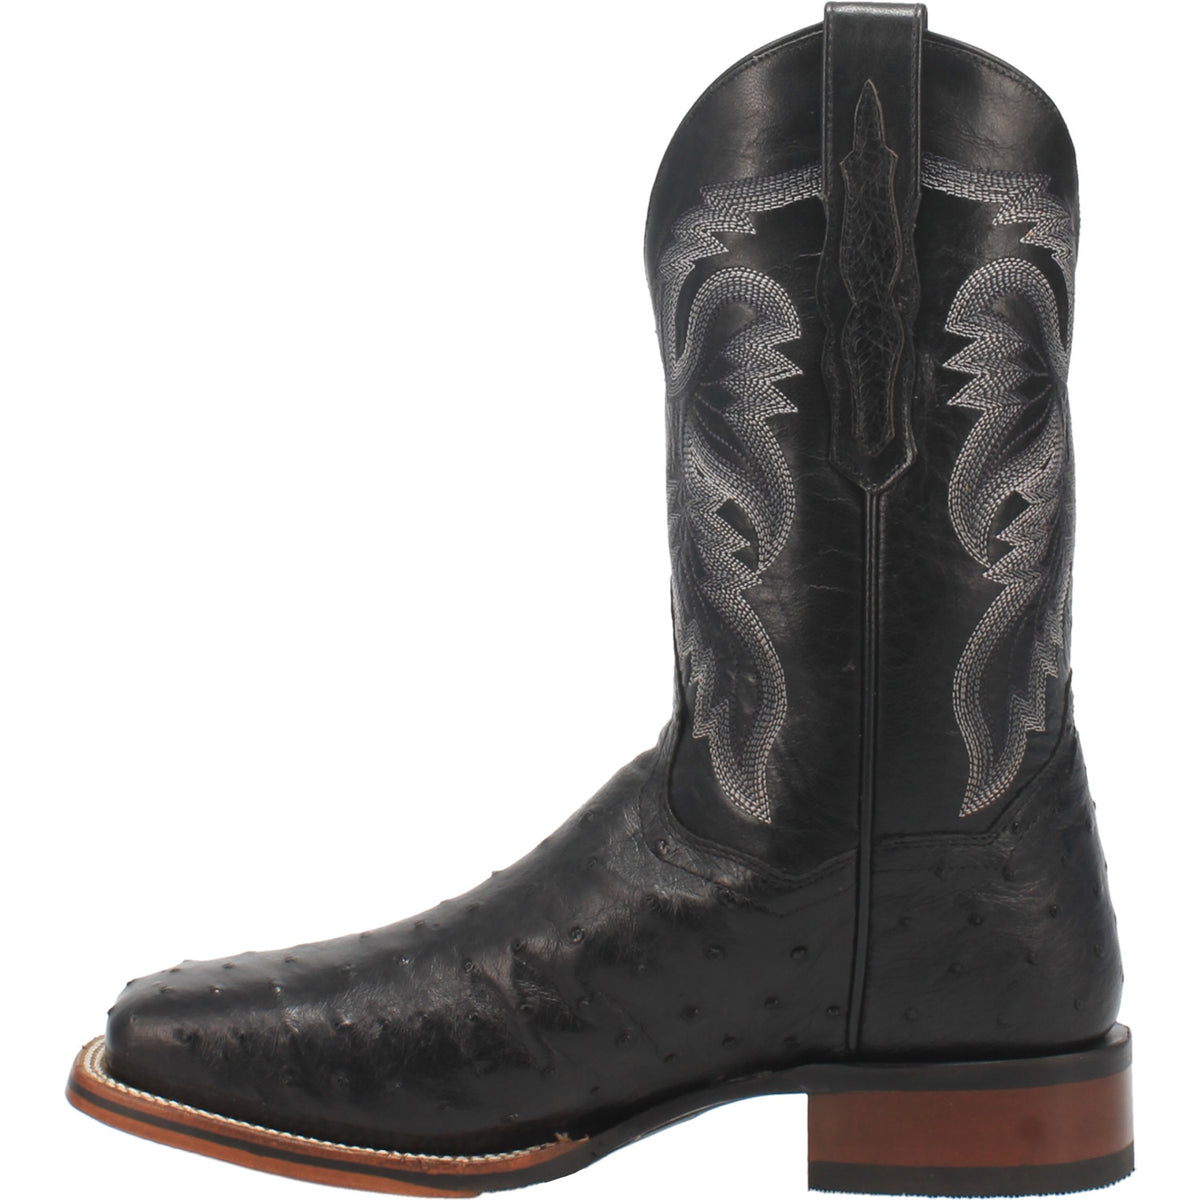 ALAMOSA FULL QUILL OSTRICH BOOT Cover